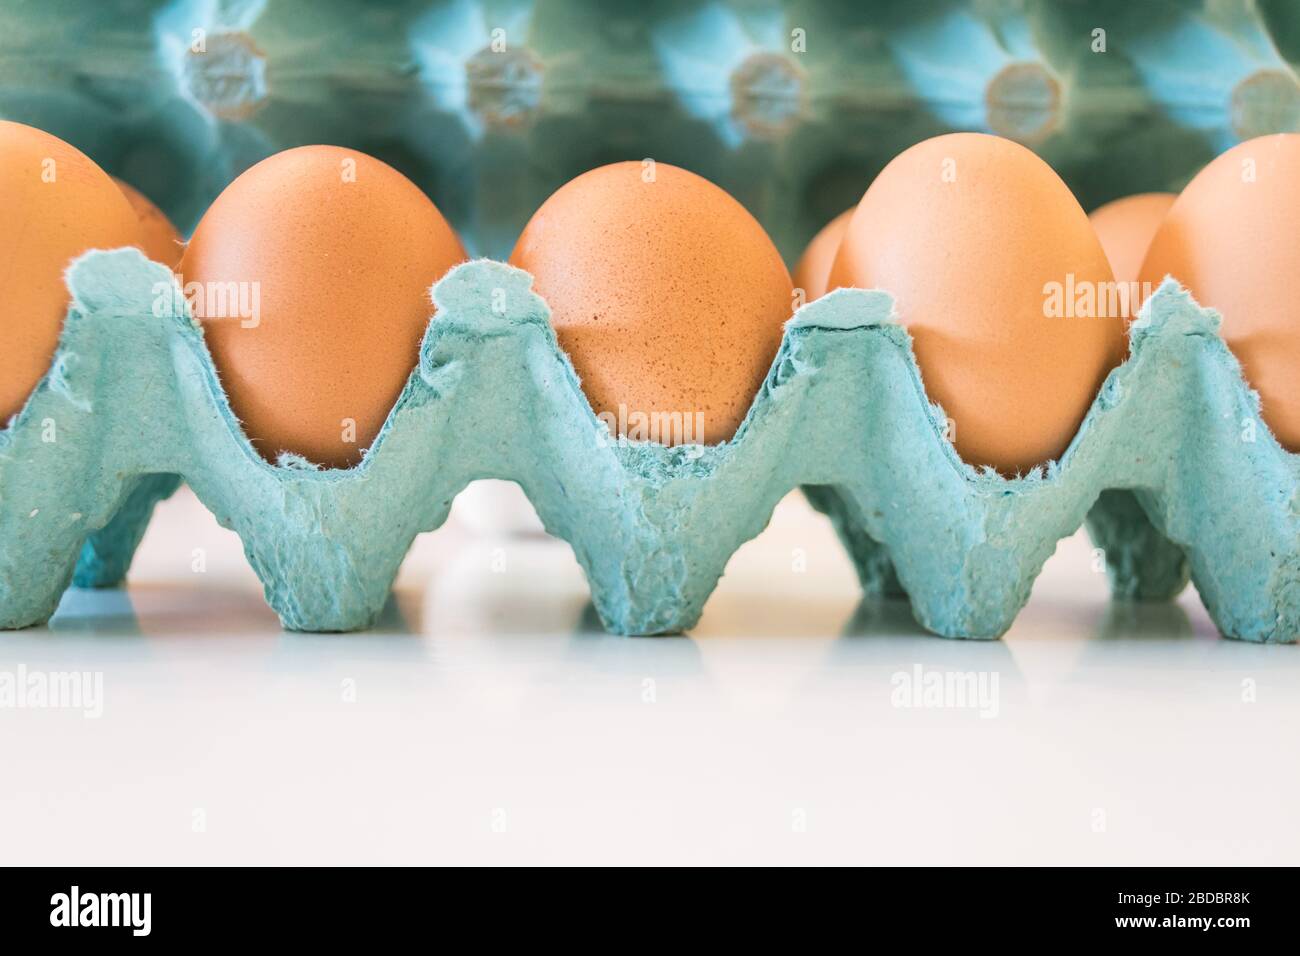 Fresh brown chicken eggs in a green box Stock Photo